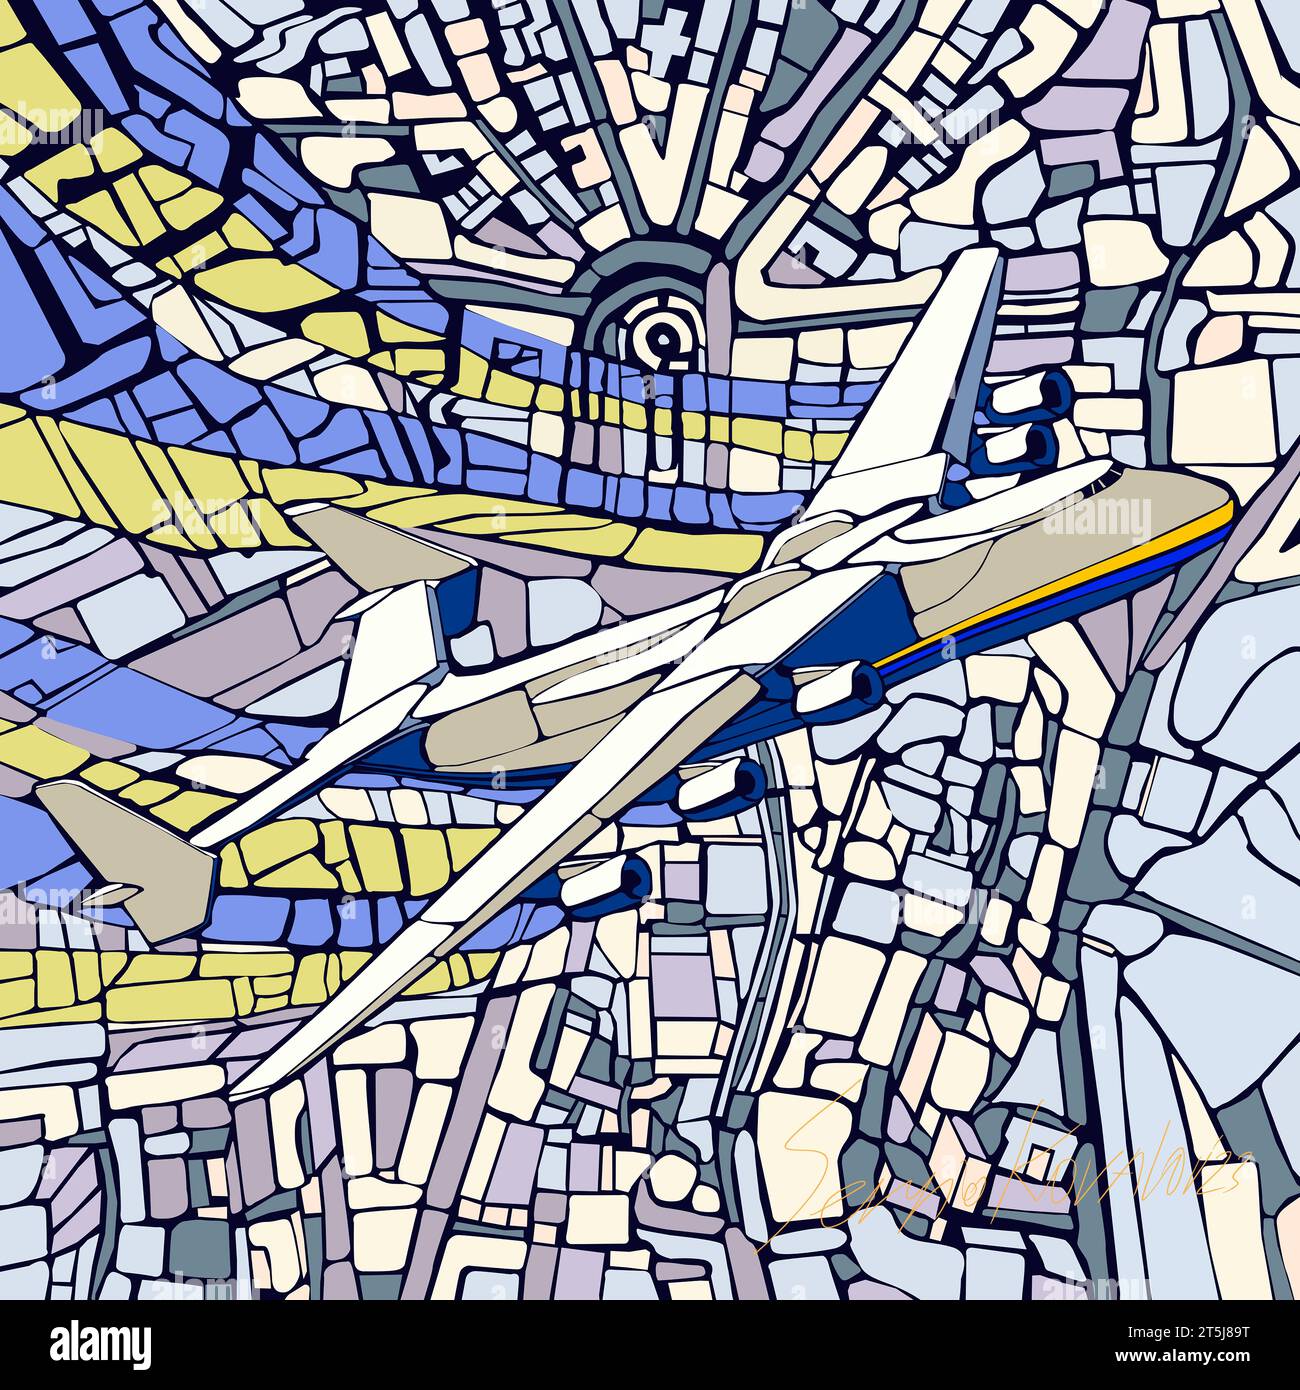 Kyiv, Ukraine. View in Kyiv city with plane in the sky. Ukrainian architecture, cargy aircraft, vector graphic, illustration create by artist. Stock Photo